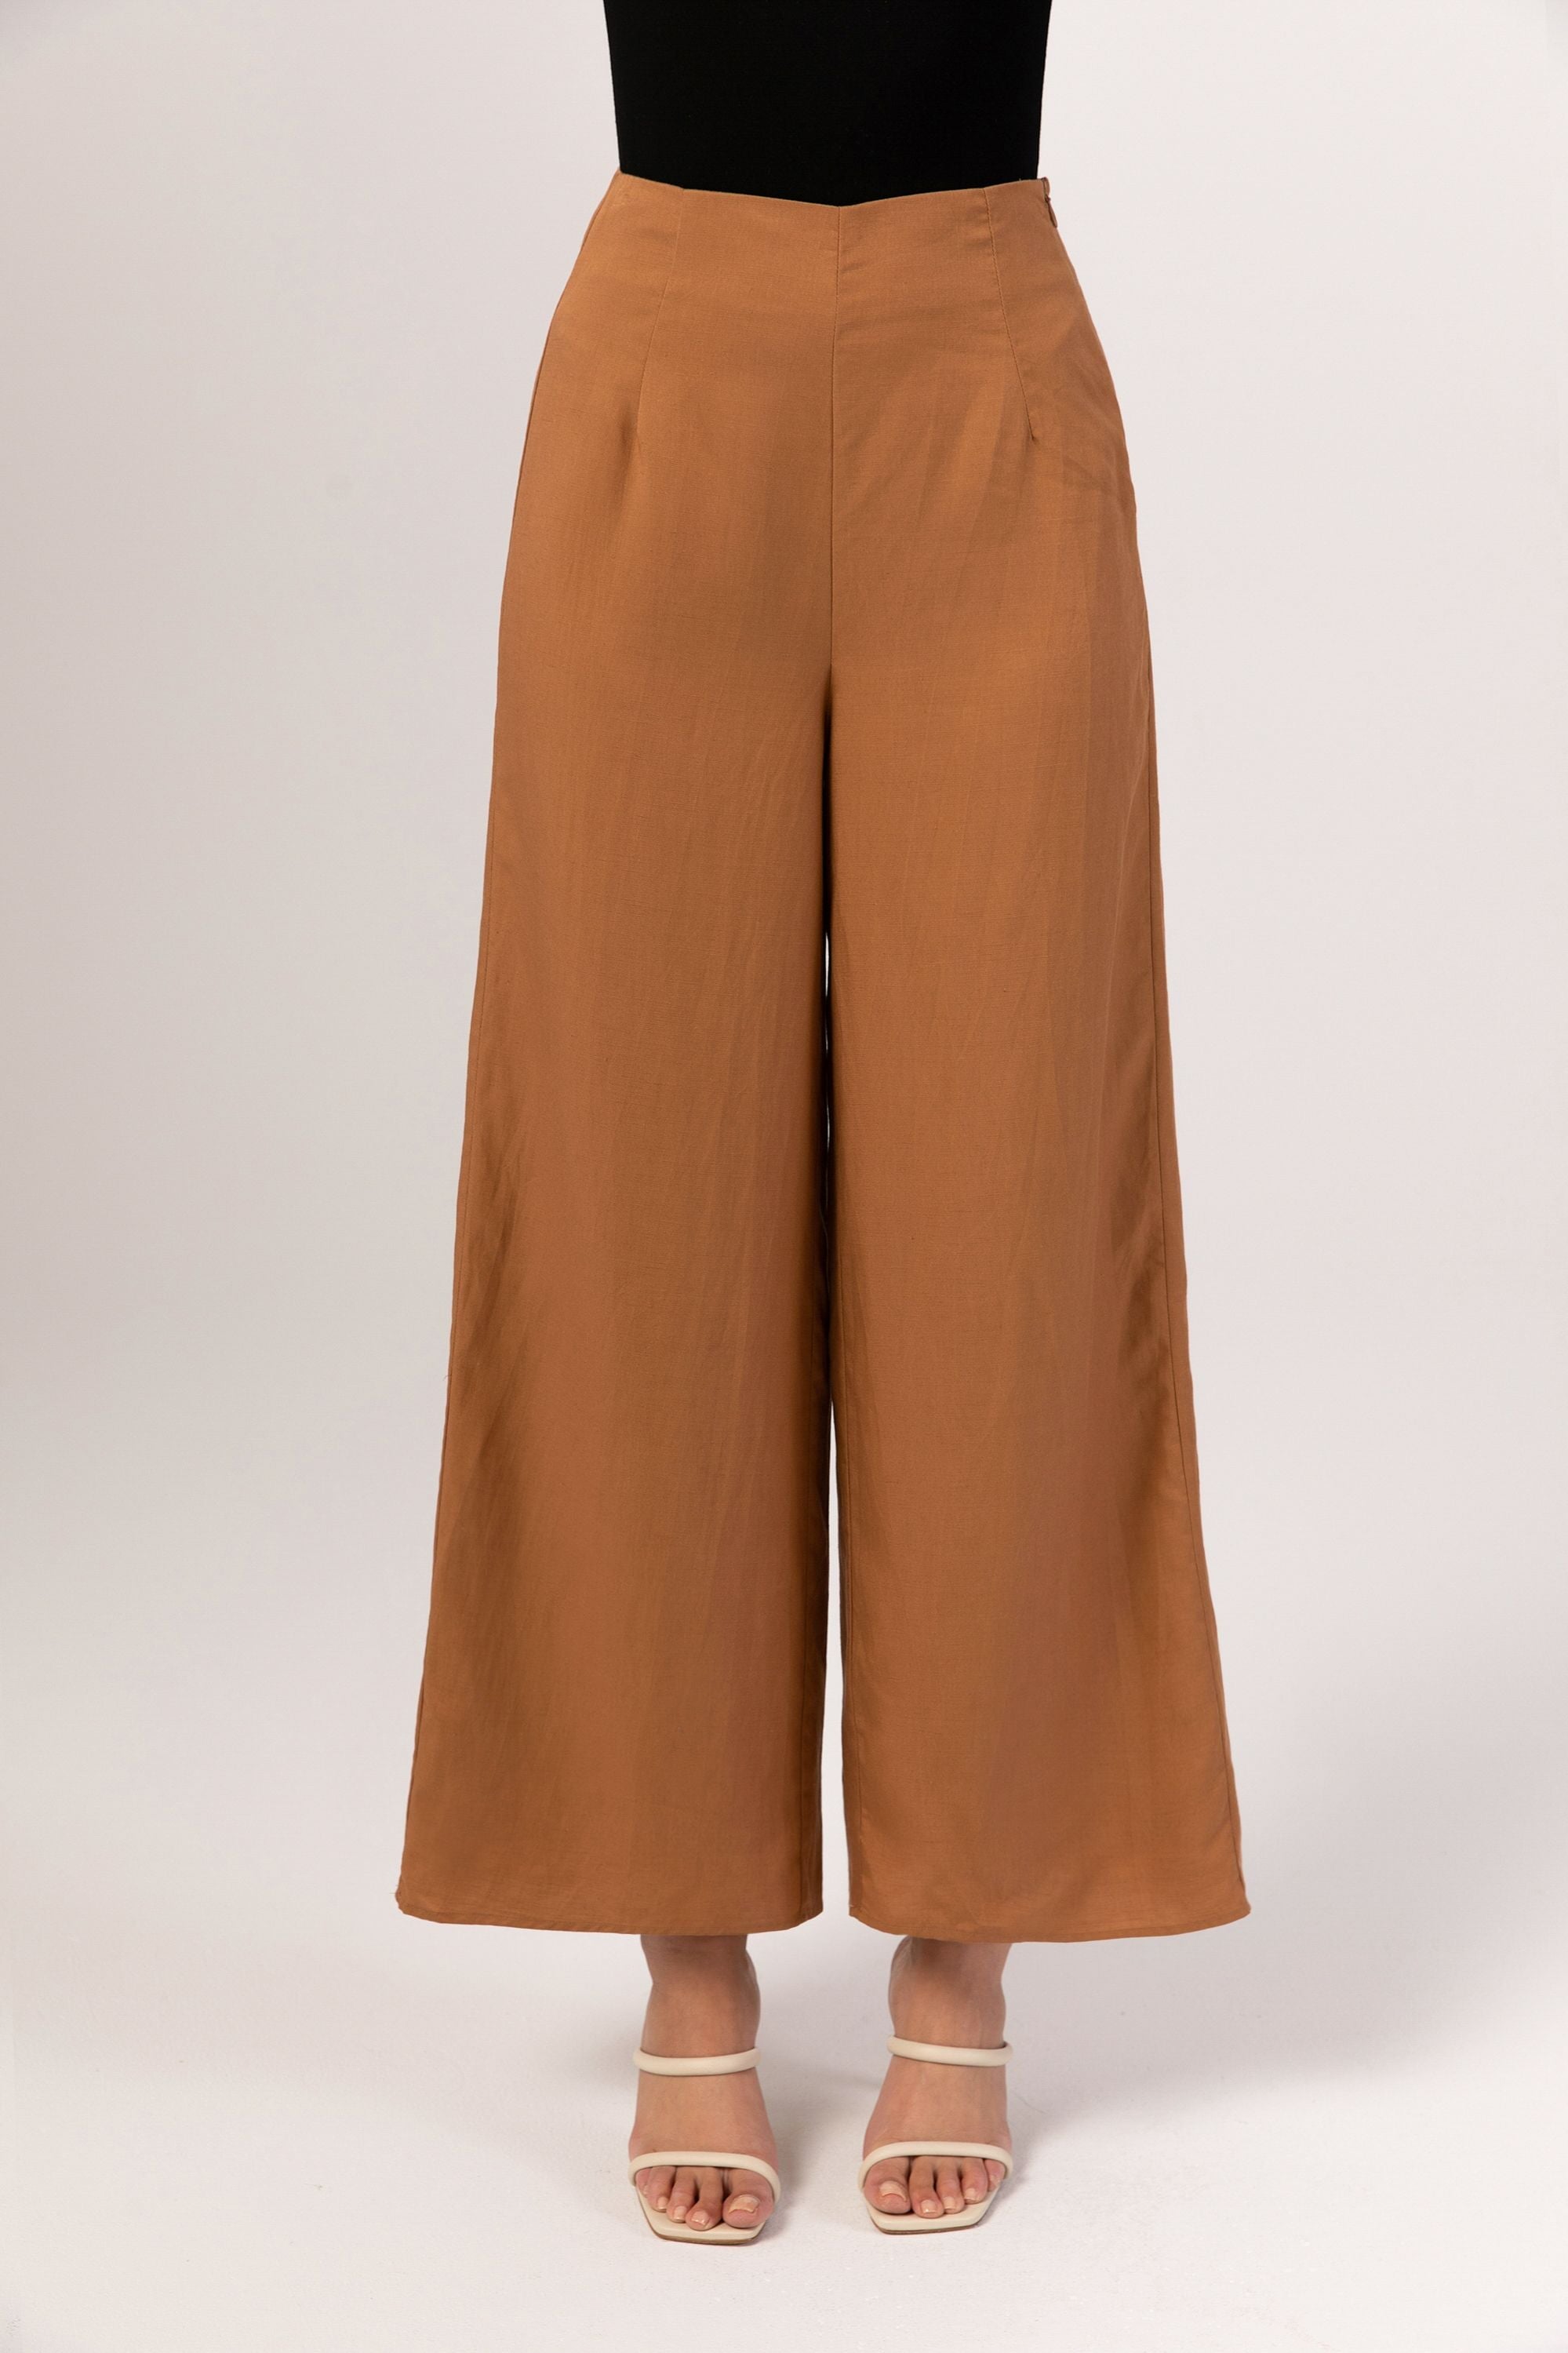 Aayomet Wide Leg Pants for Women 2023 Cargo Pants Woman Relaxed